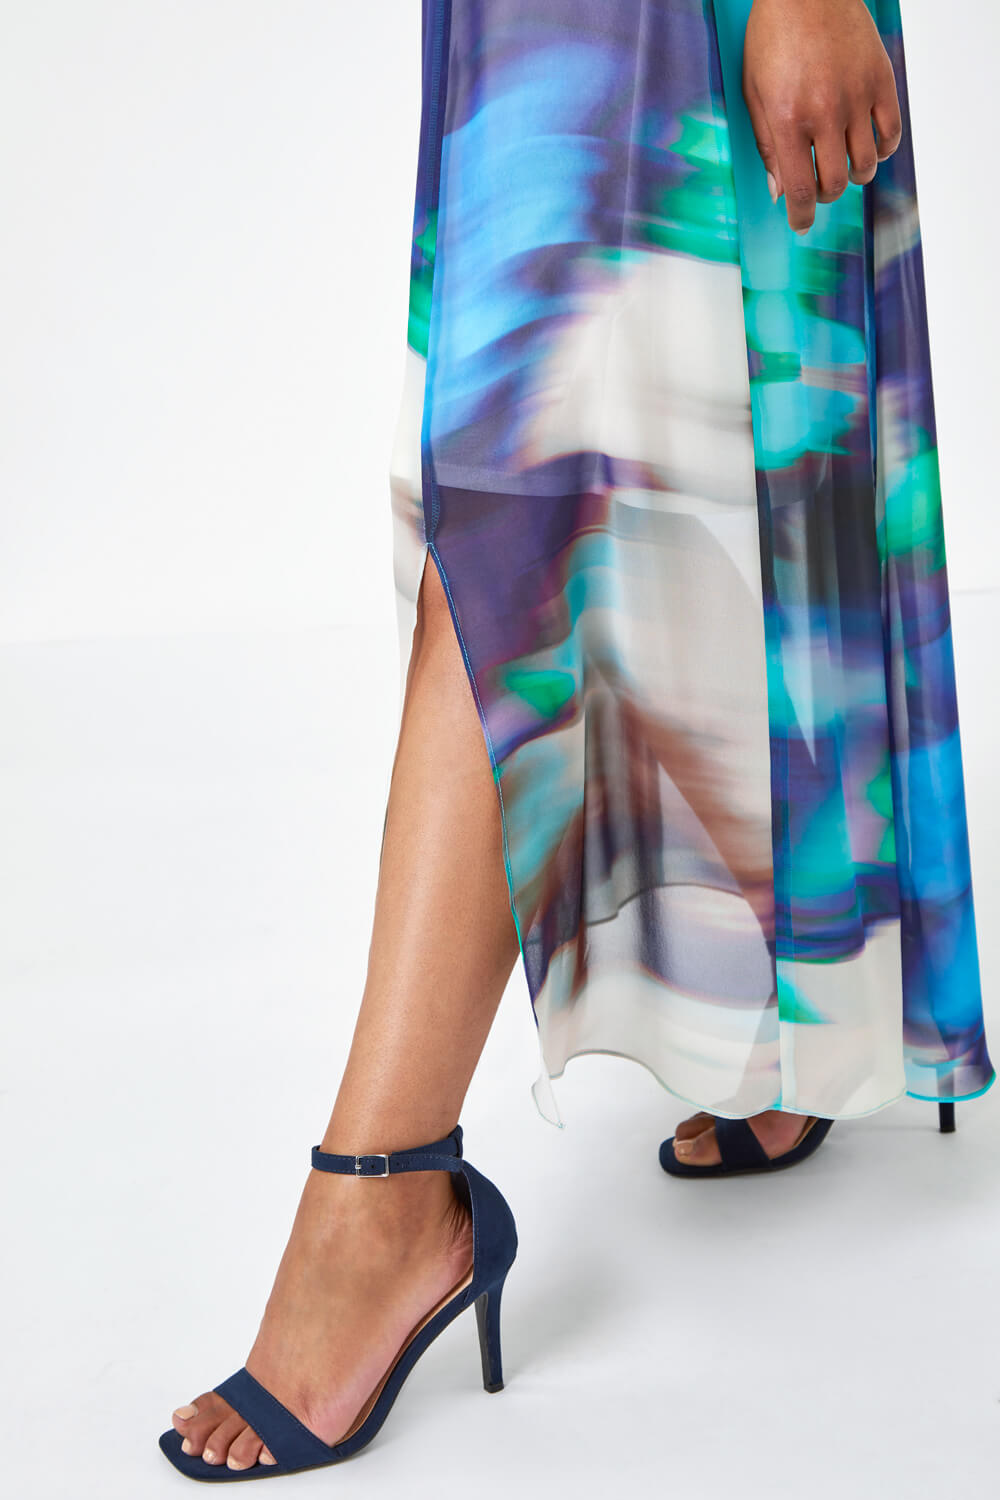 Turquoise Petite Abstract Print Maxi Dress, Image 5 of 5